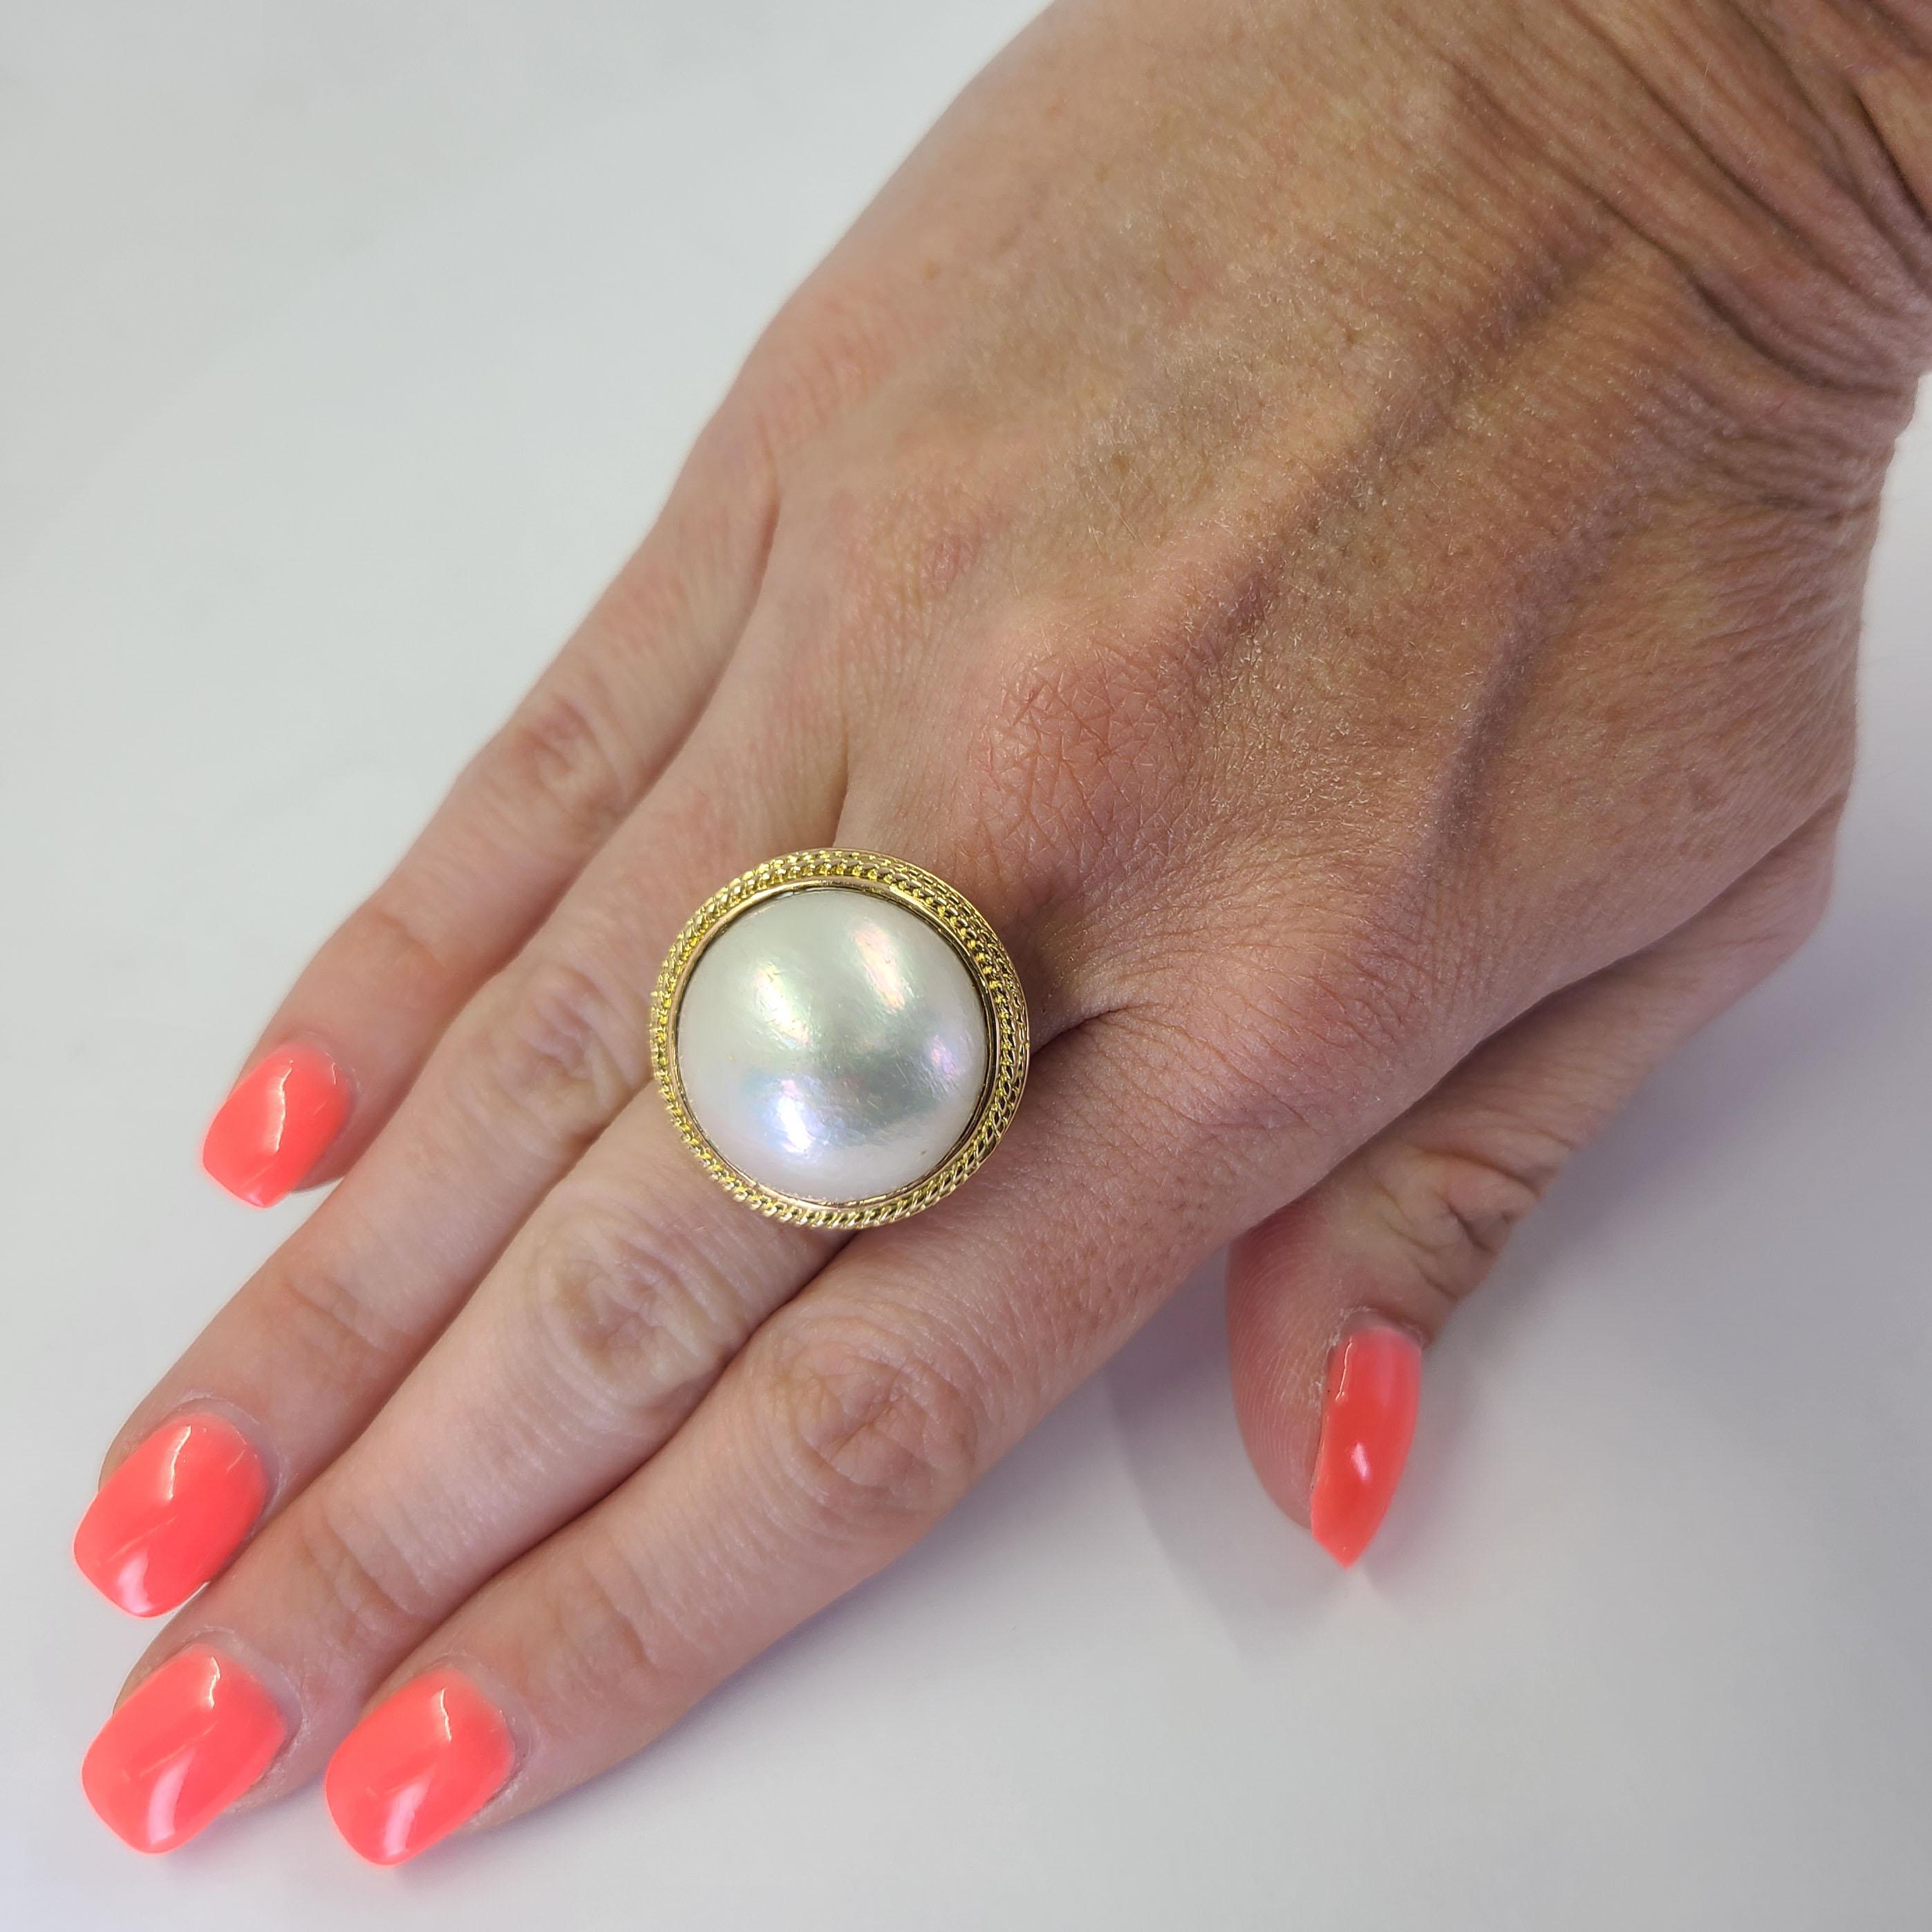 18 Karat Yellow Gold Round Mabe Pearl Ring With 0.92 Inch Diameter Including Bezel. Finger Size 5.5; Purchase Includes One Sizing Service Prior To Shipment. Finished Weight Is 13.7 Grams.